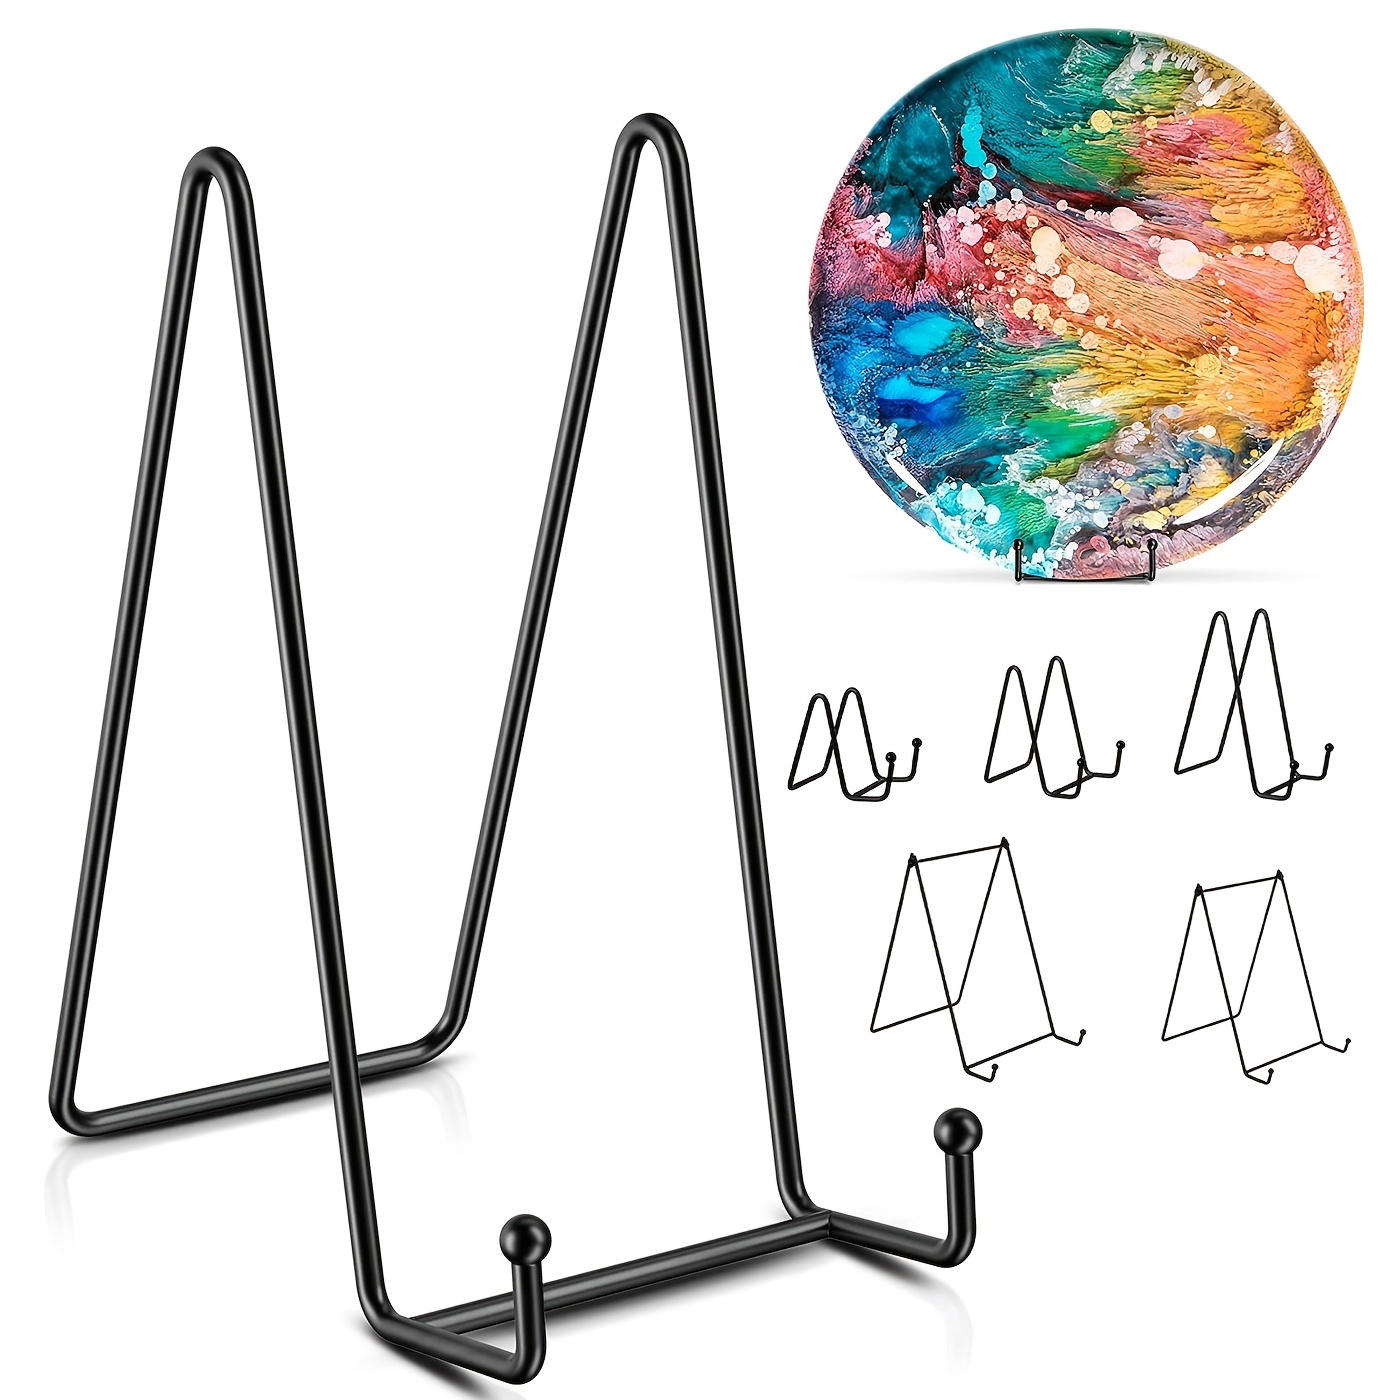 Plate Holder Display Stand, Picture Frame Holder Stand, Easel Display  Stand, Book Display Stand Iron Display Stand, Black Iron Easel Plate  Display Photo Holder Stand, Displays Picture Frames, Decorative Plates,  Tablets And